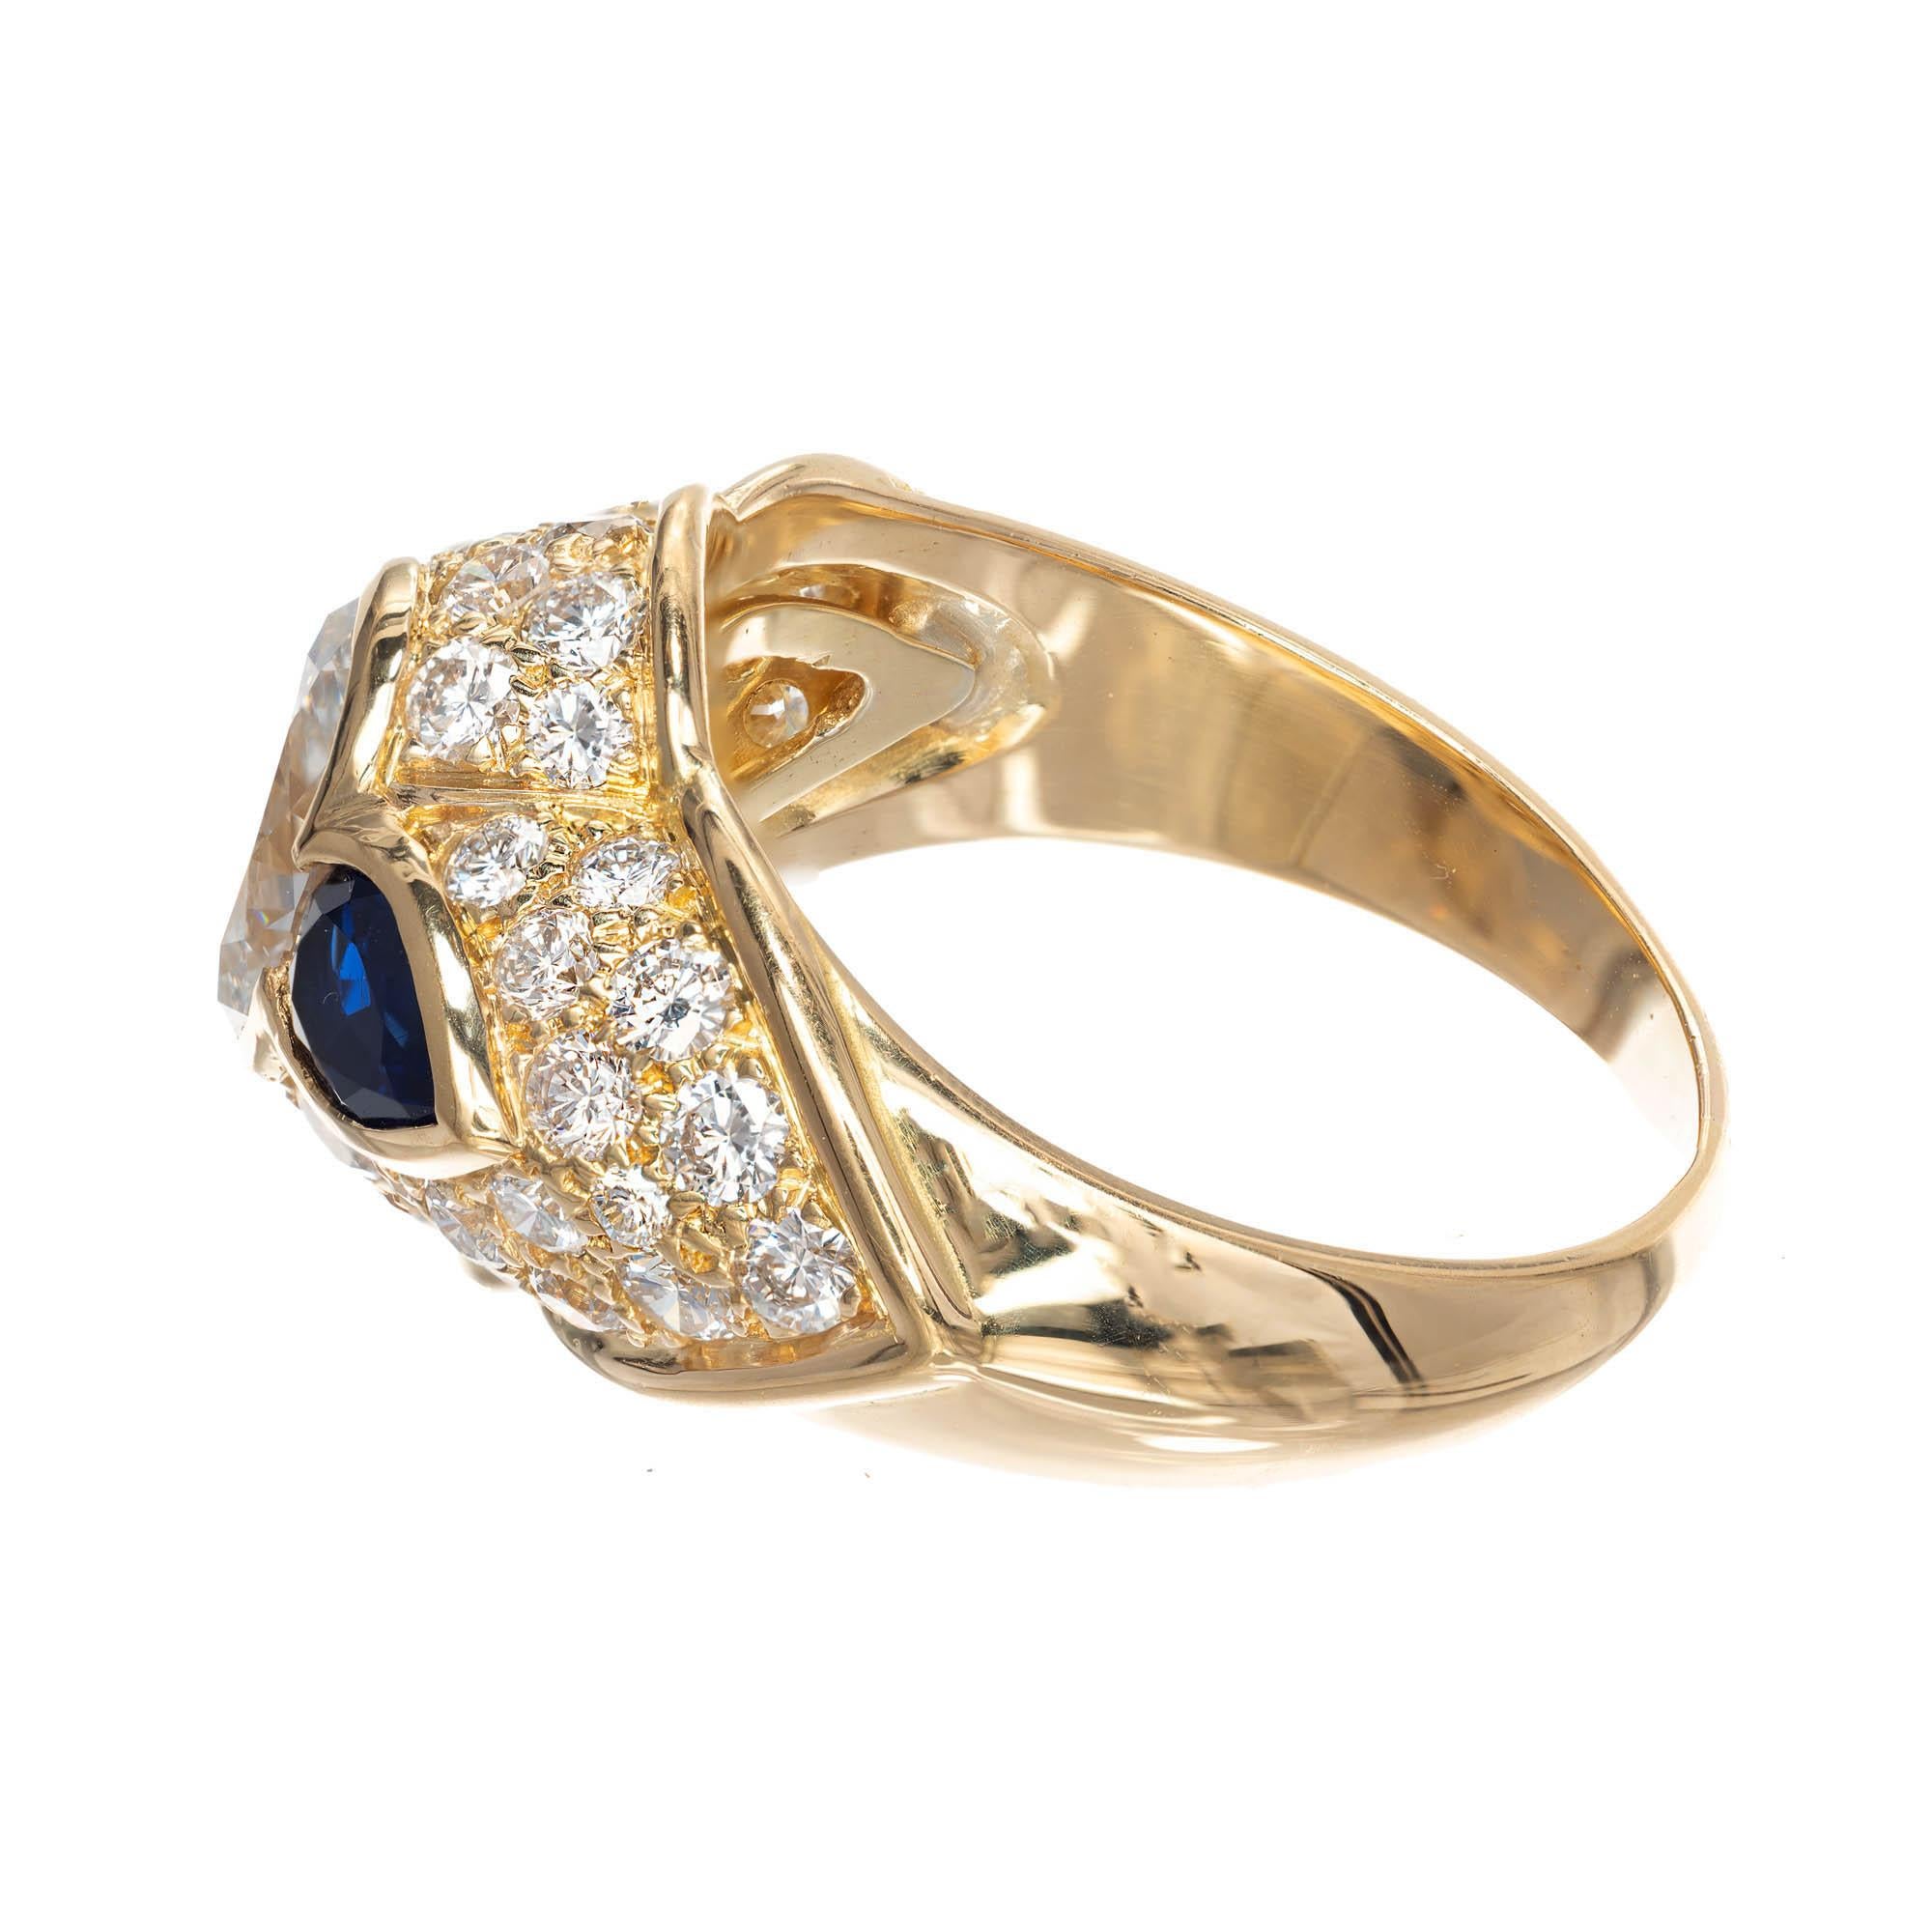 Diamond and sapphire 18k gold engagement ring. Oval cut diamond center stone bezel set and accented by pear shape blue sapphires on each side with extra fine quality round brilliant cut diamonds set all around scalloped design band.

1 oval G VS2